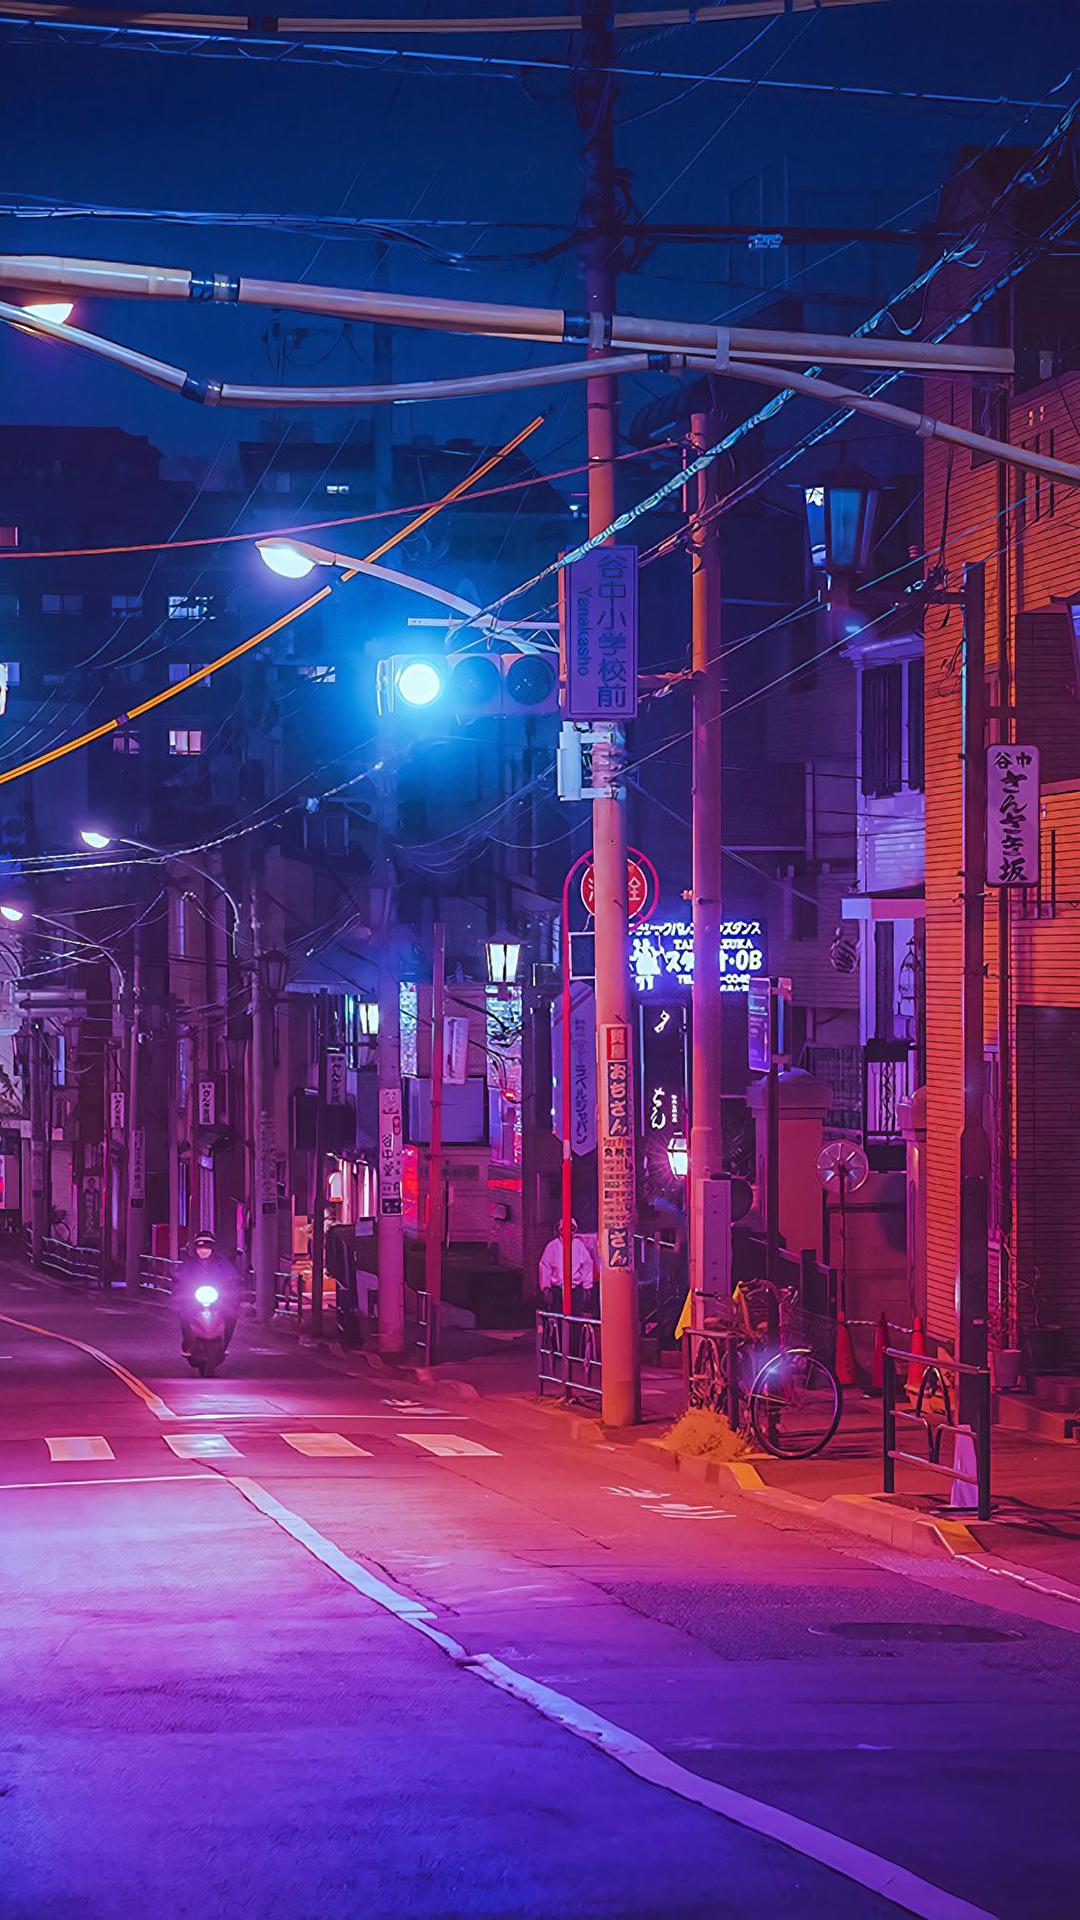 Japan Aesthetic Street Wallpaper Iphone / Find over 100+ of the best ...